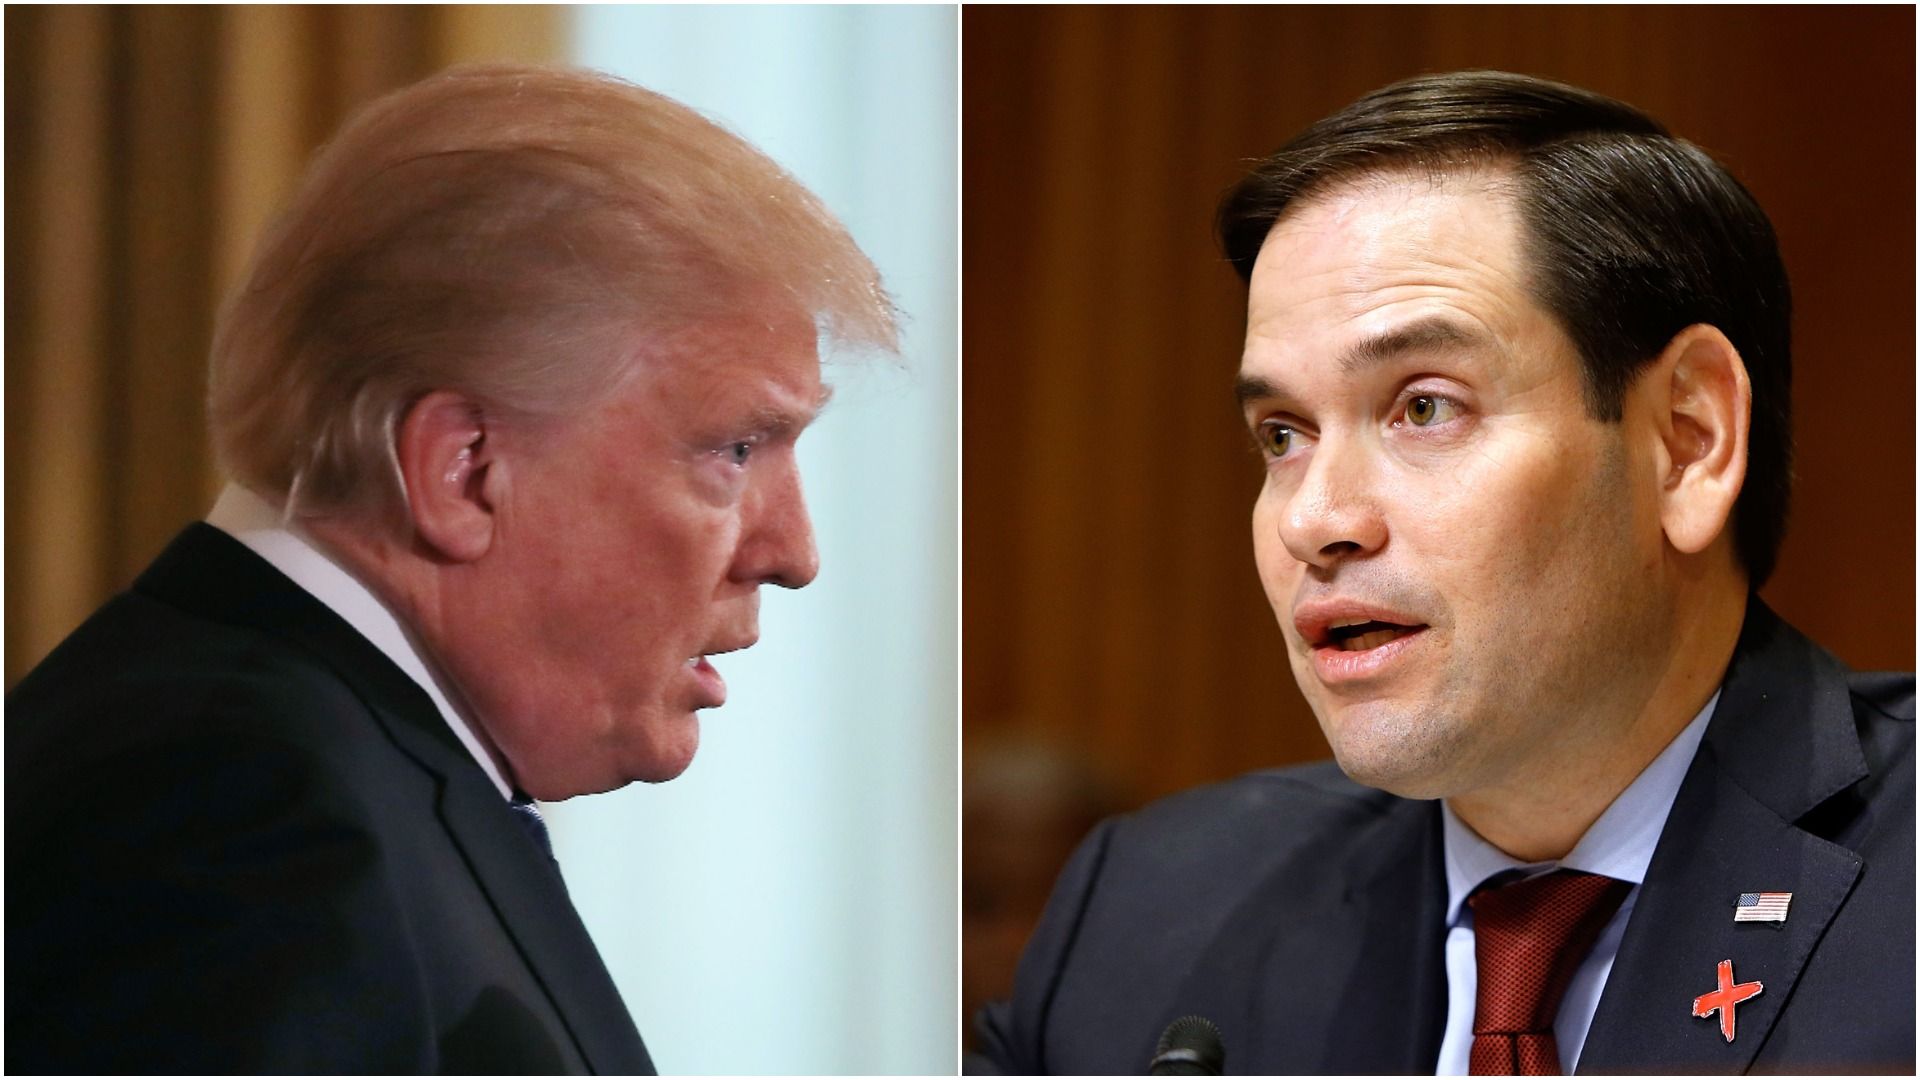 A split photo of Trump and Rubio, facing each other